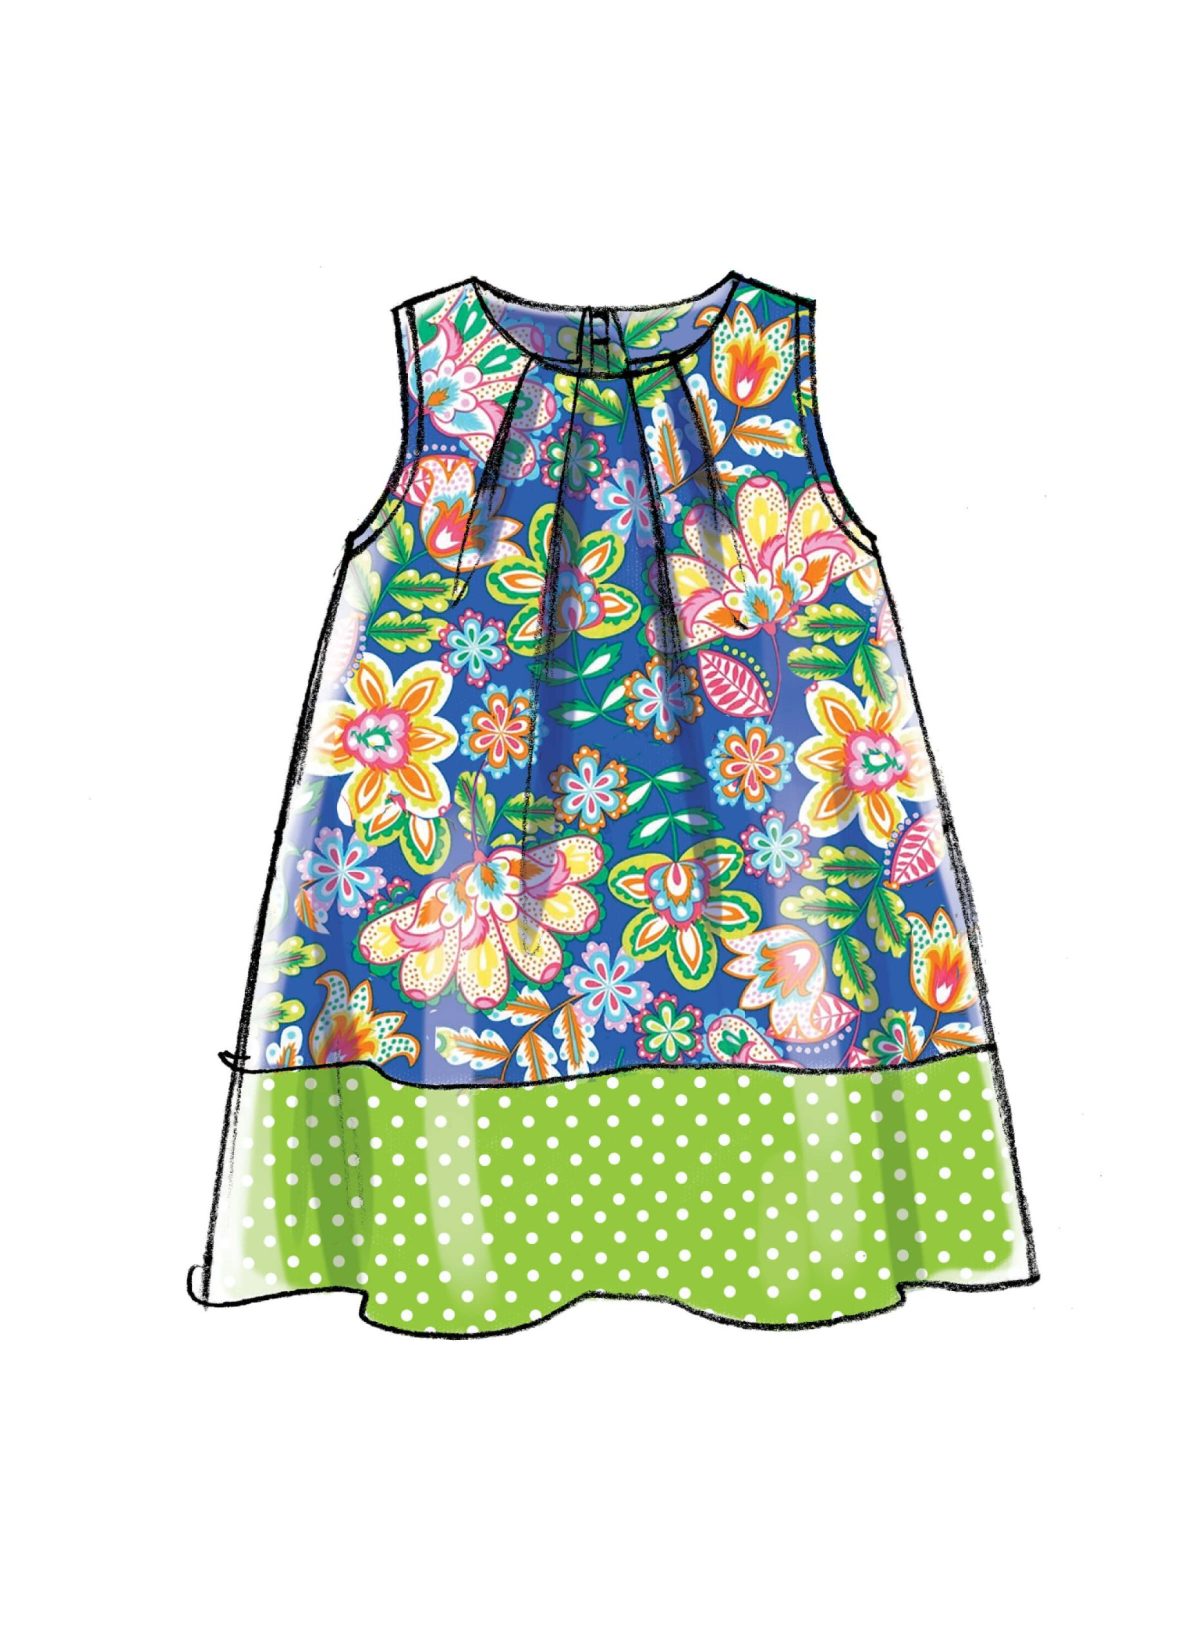 McCall's Sewing Pattern M7308 Toddlers' Tent Dresses